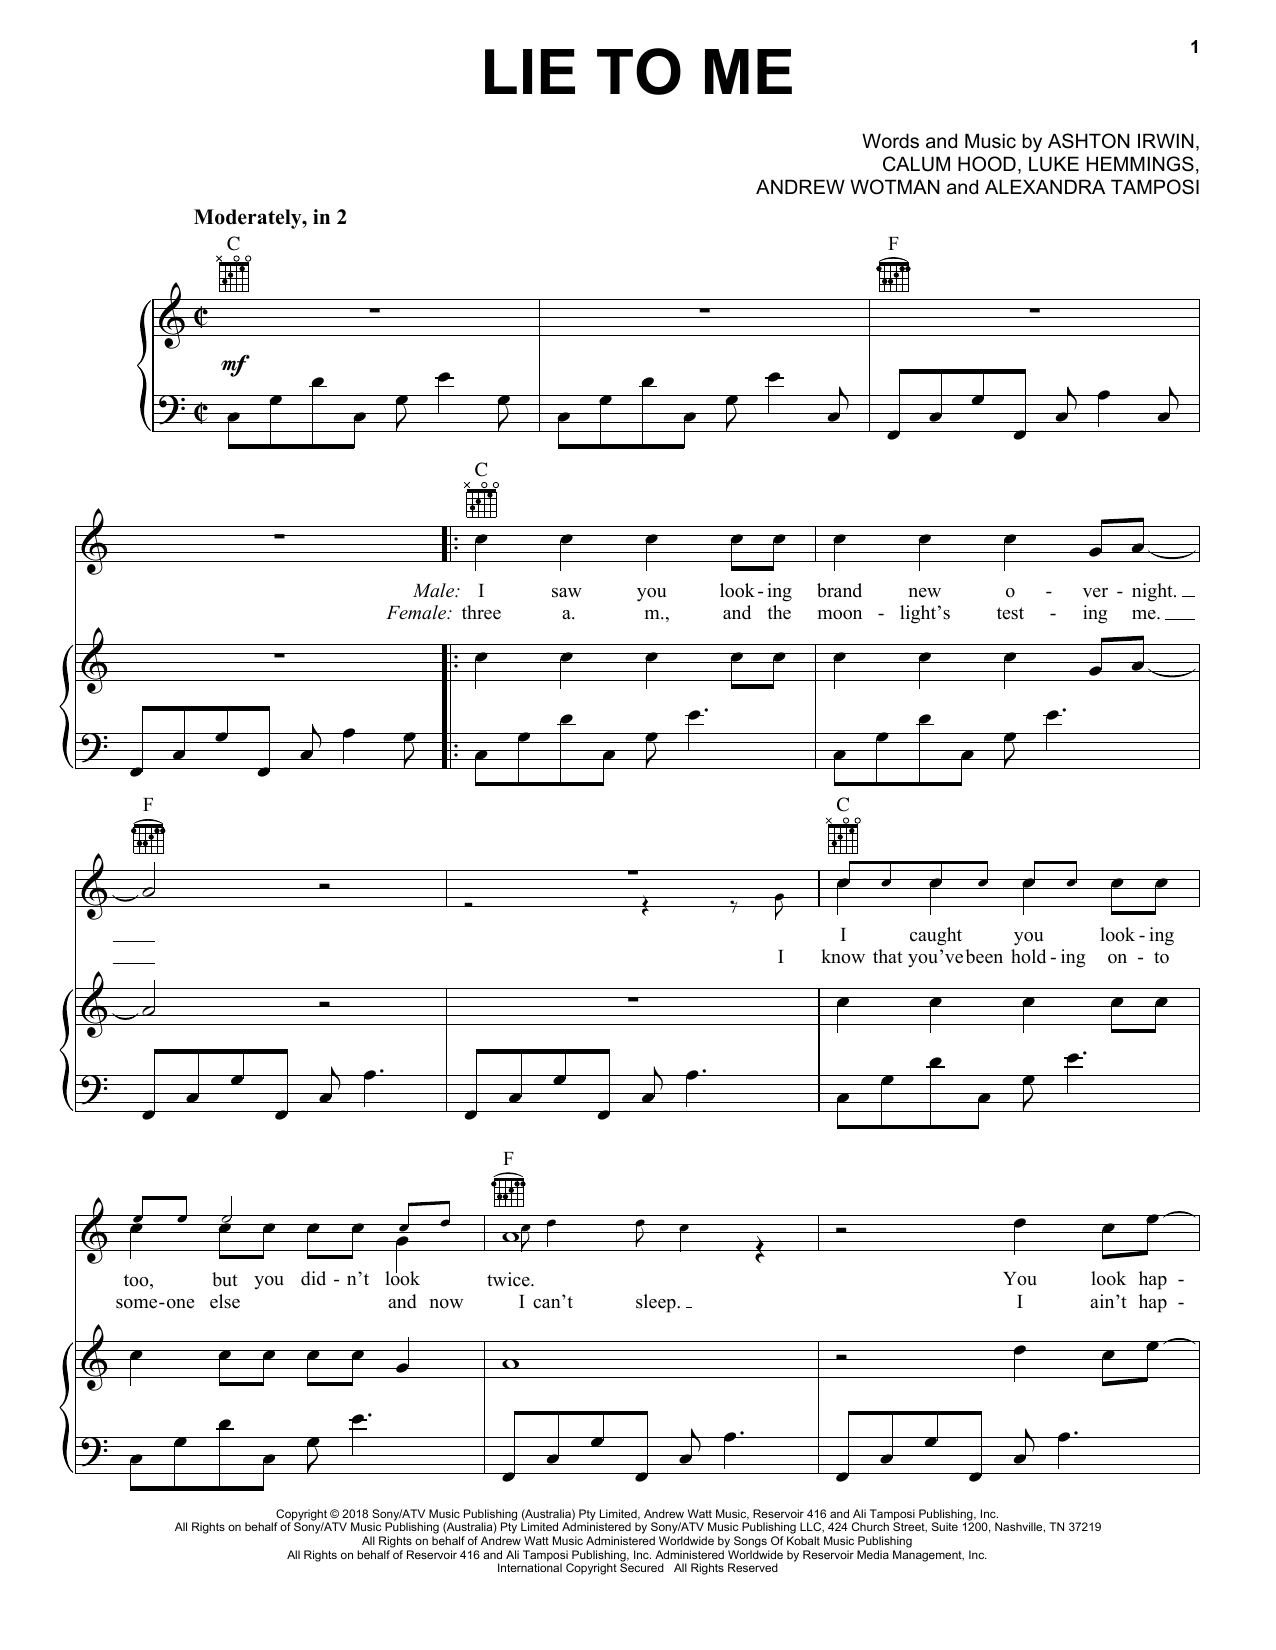 Download 5 Seconds of Summer Lie To Me Sheet Music